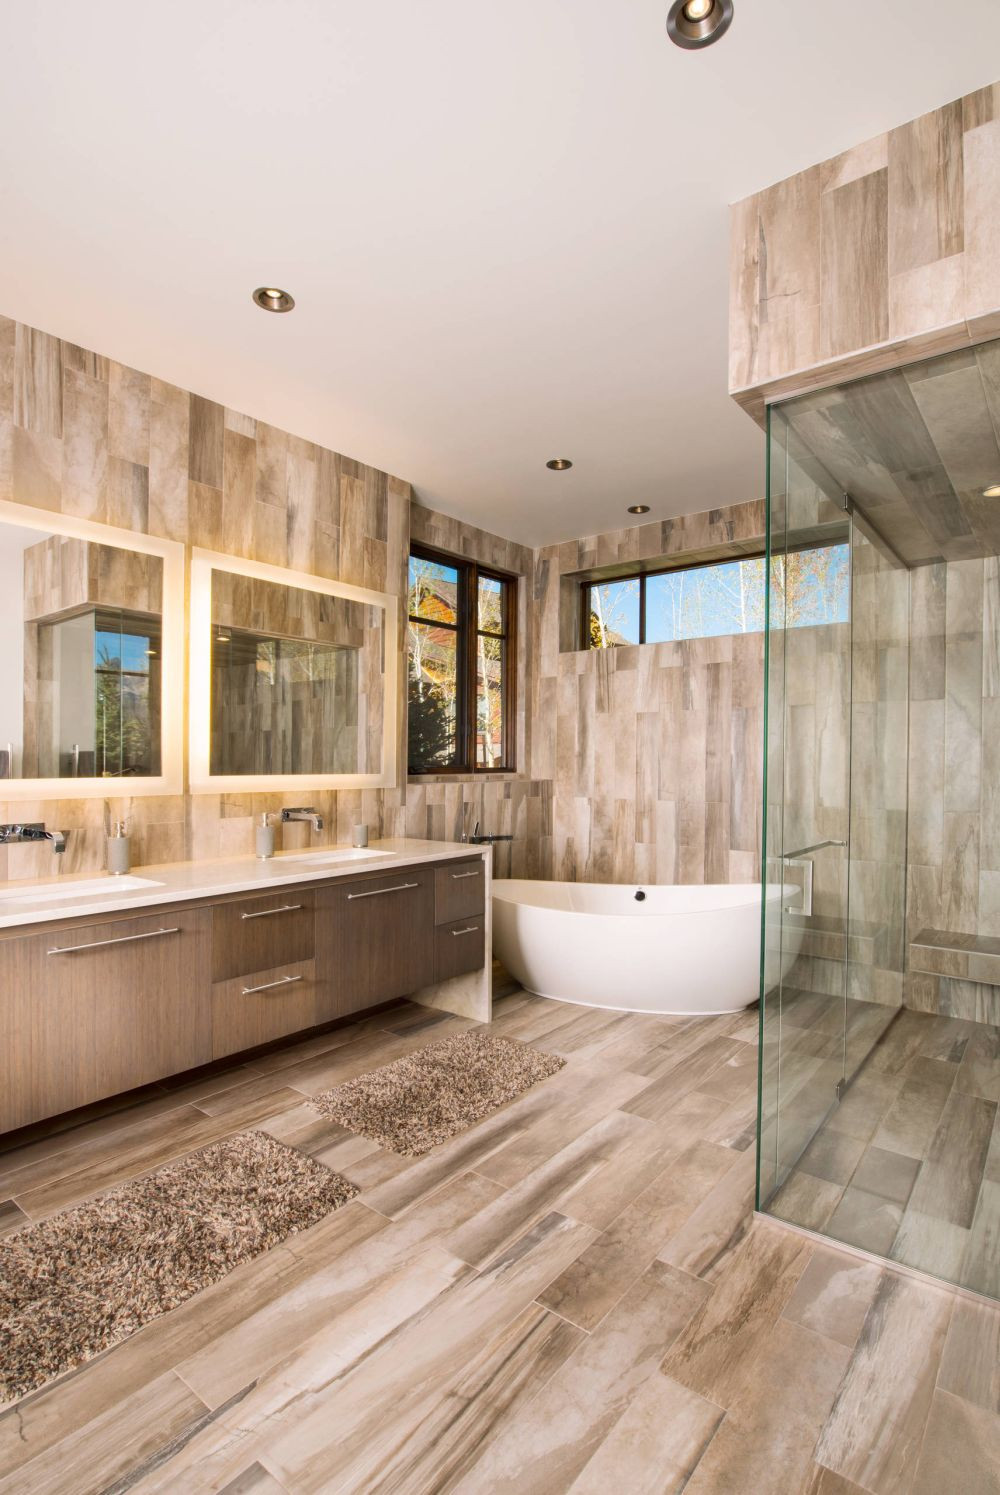 Wood Look Tile Bathrooms
 15 Wood Tile Showers For Your Bathroom